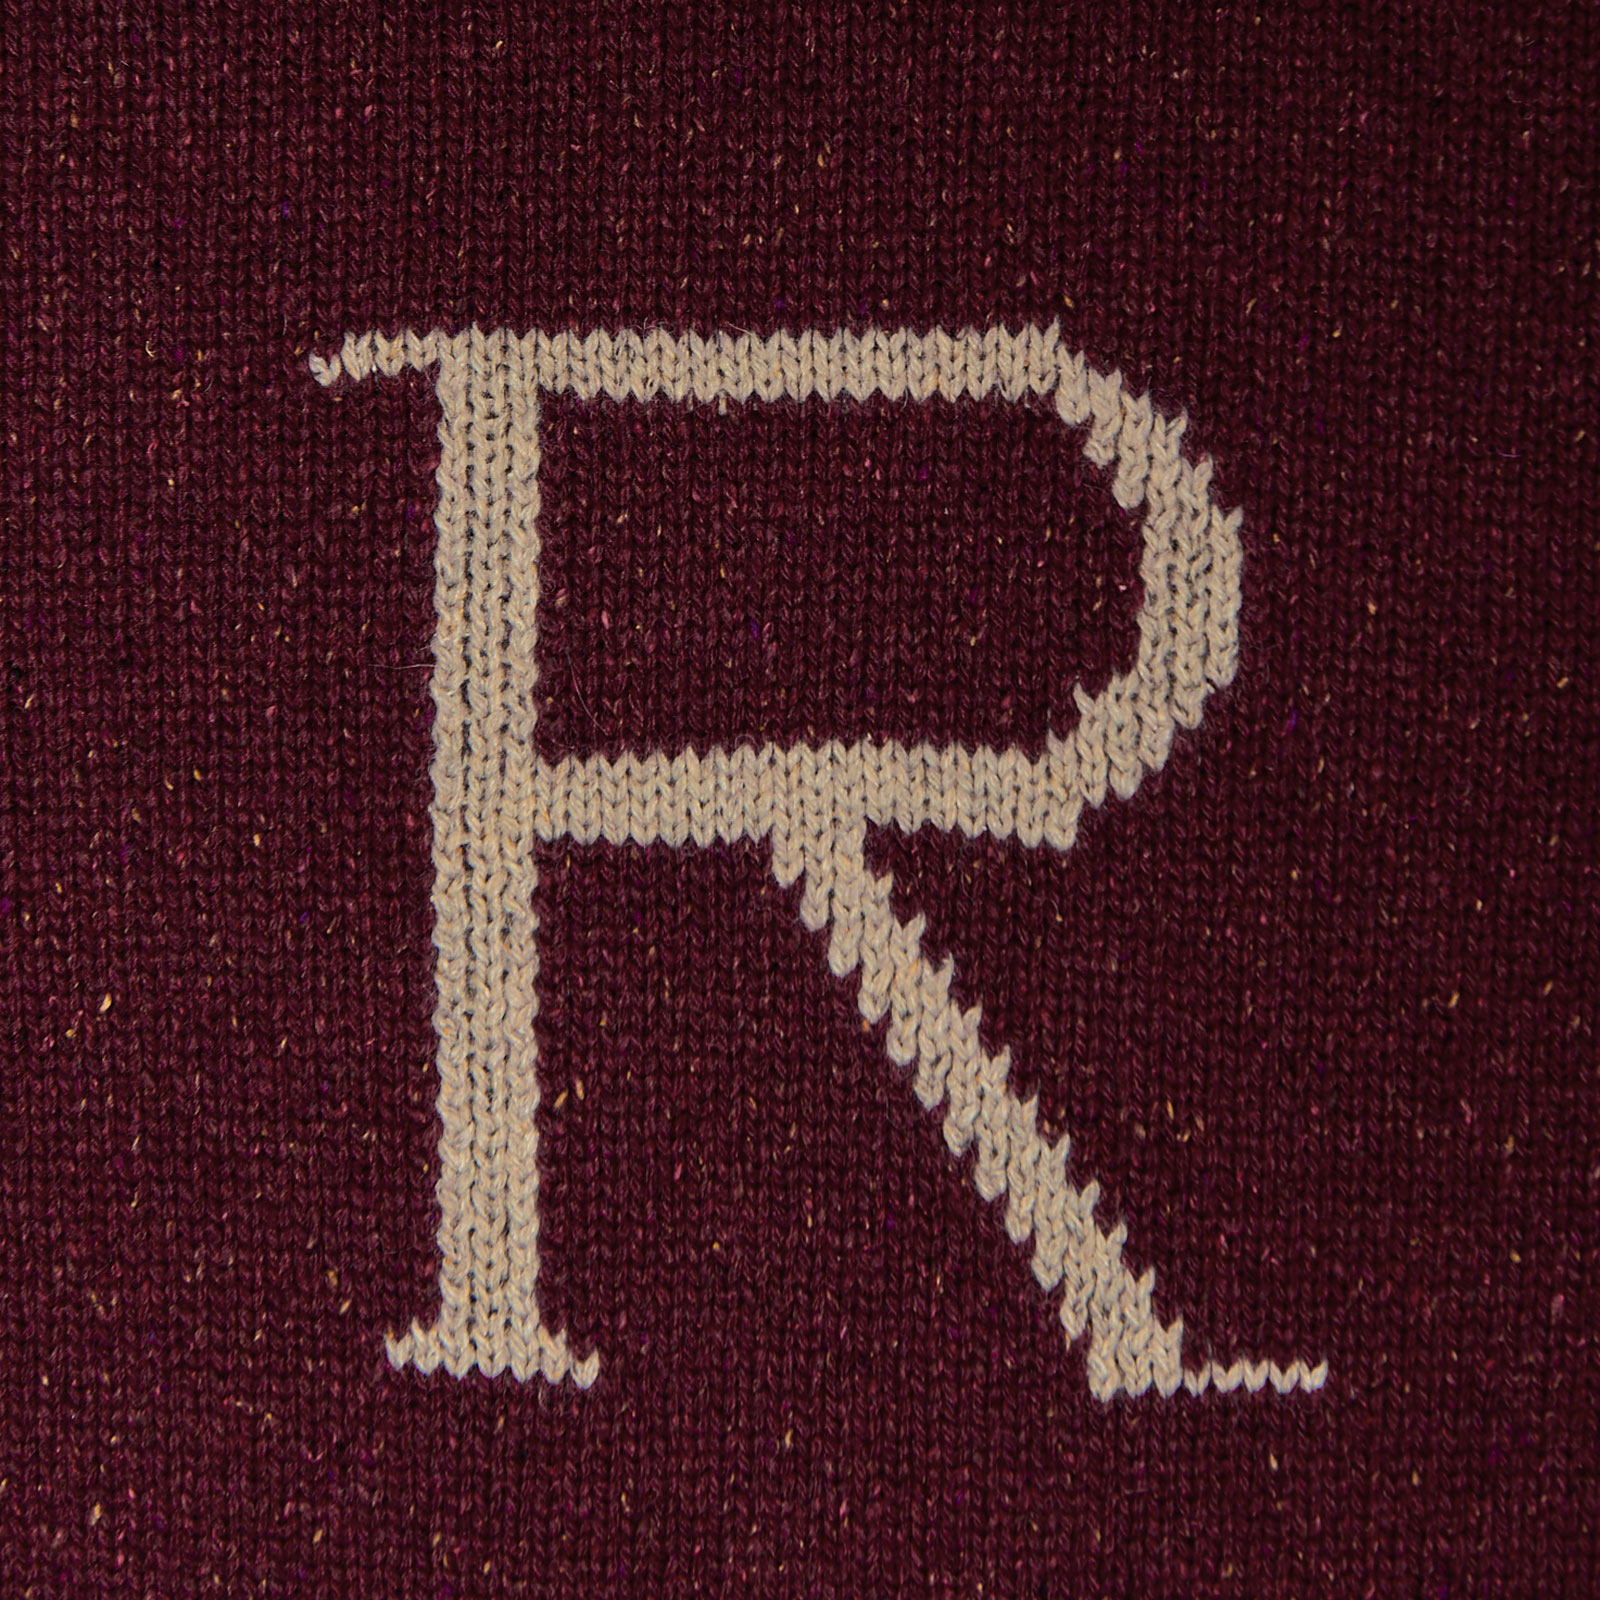 Harry Potter - R for Ron Strickpullover rot